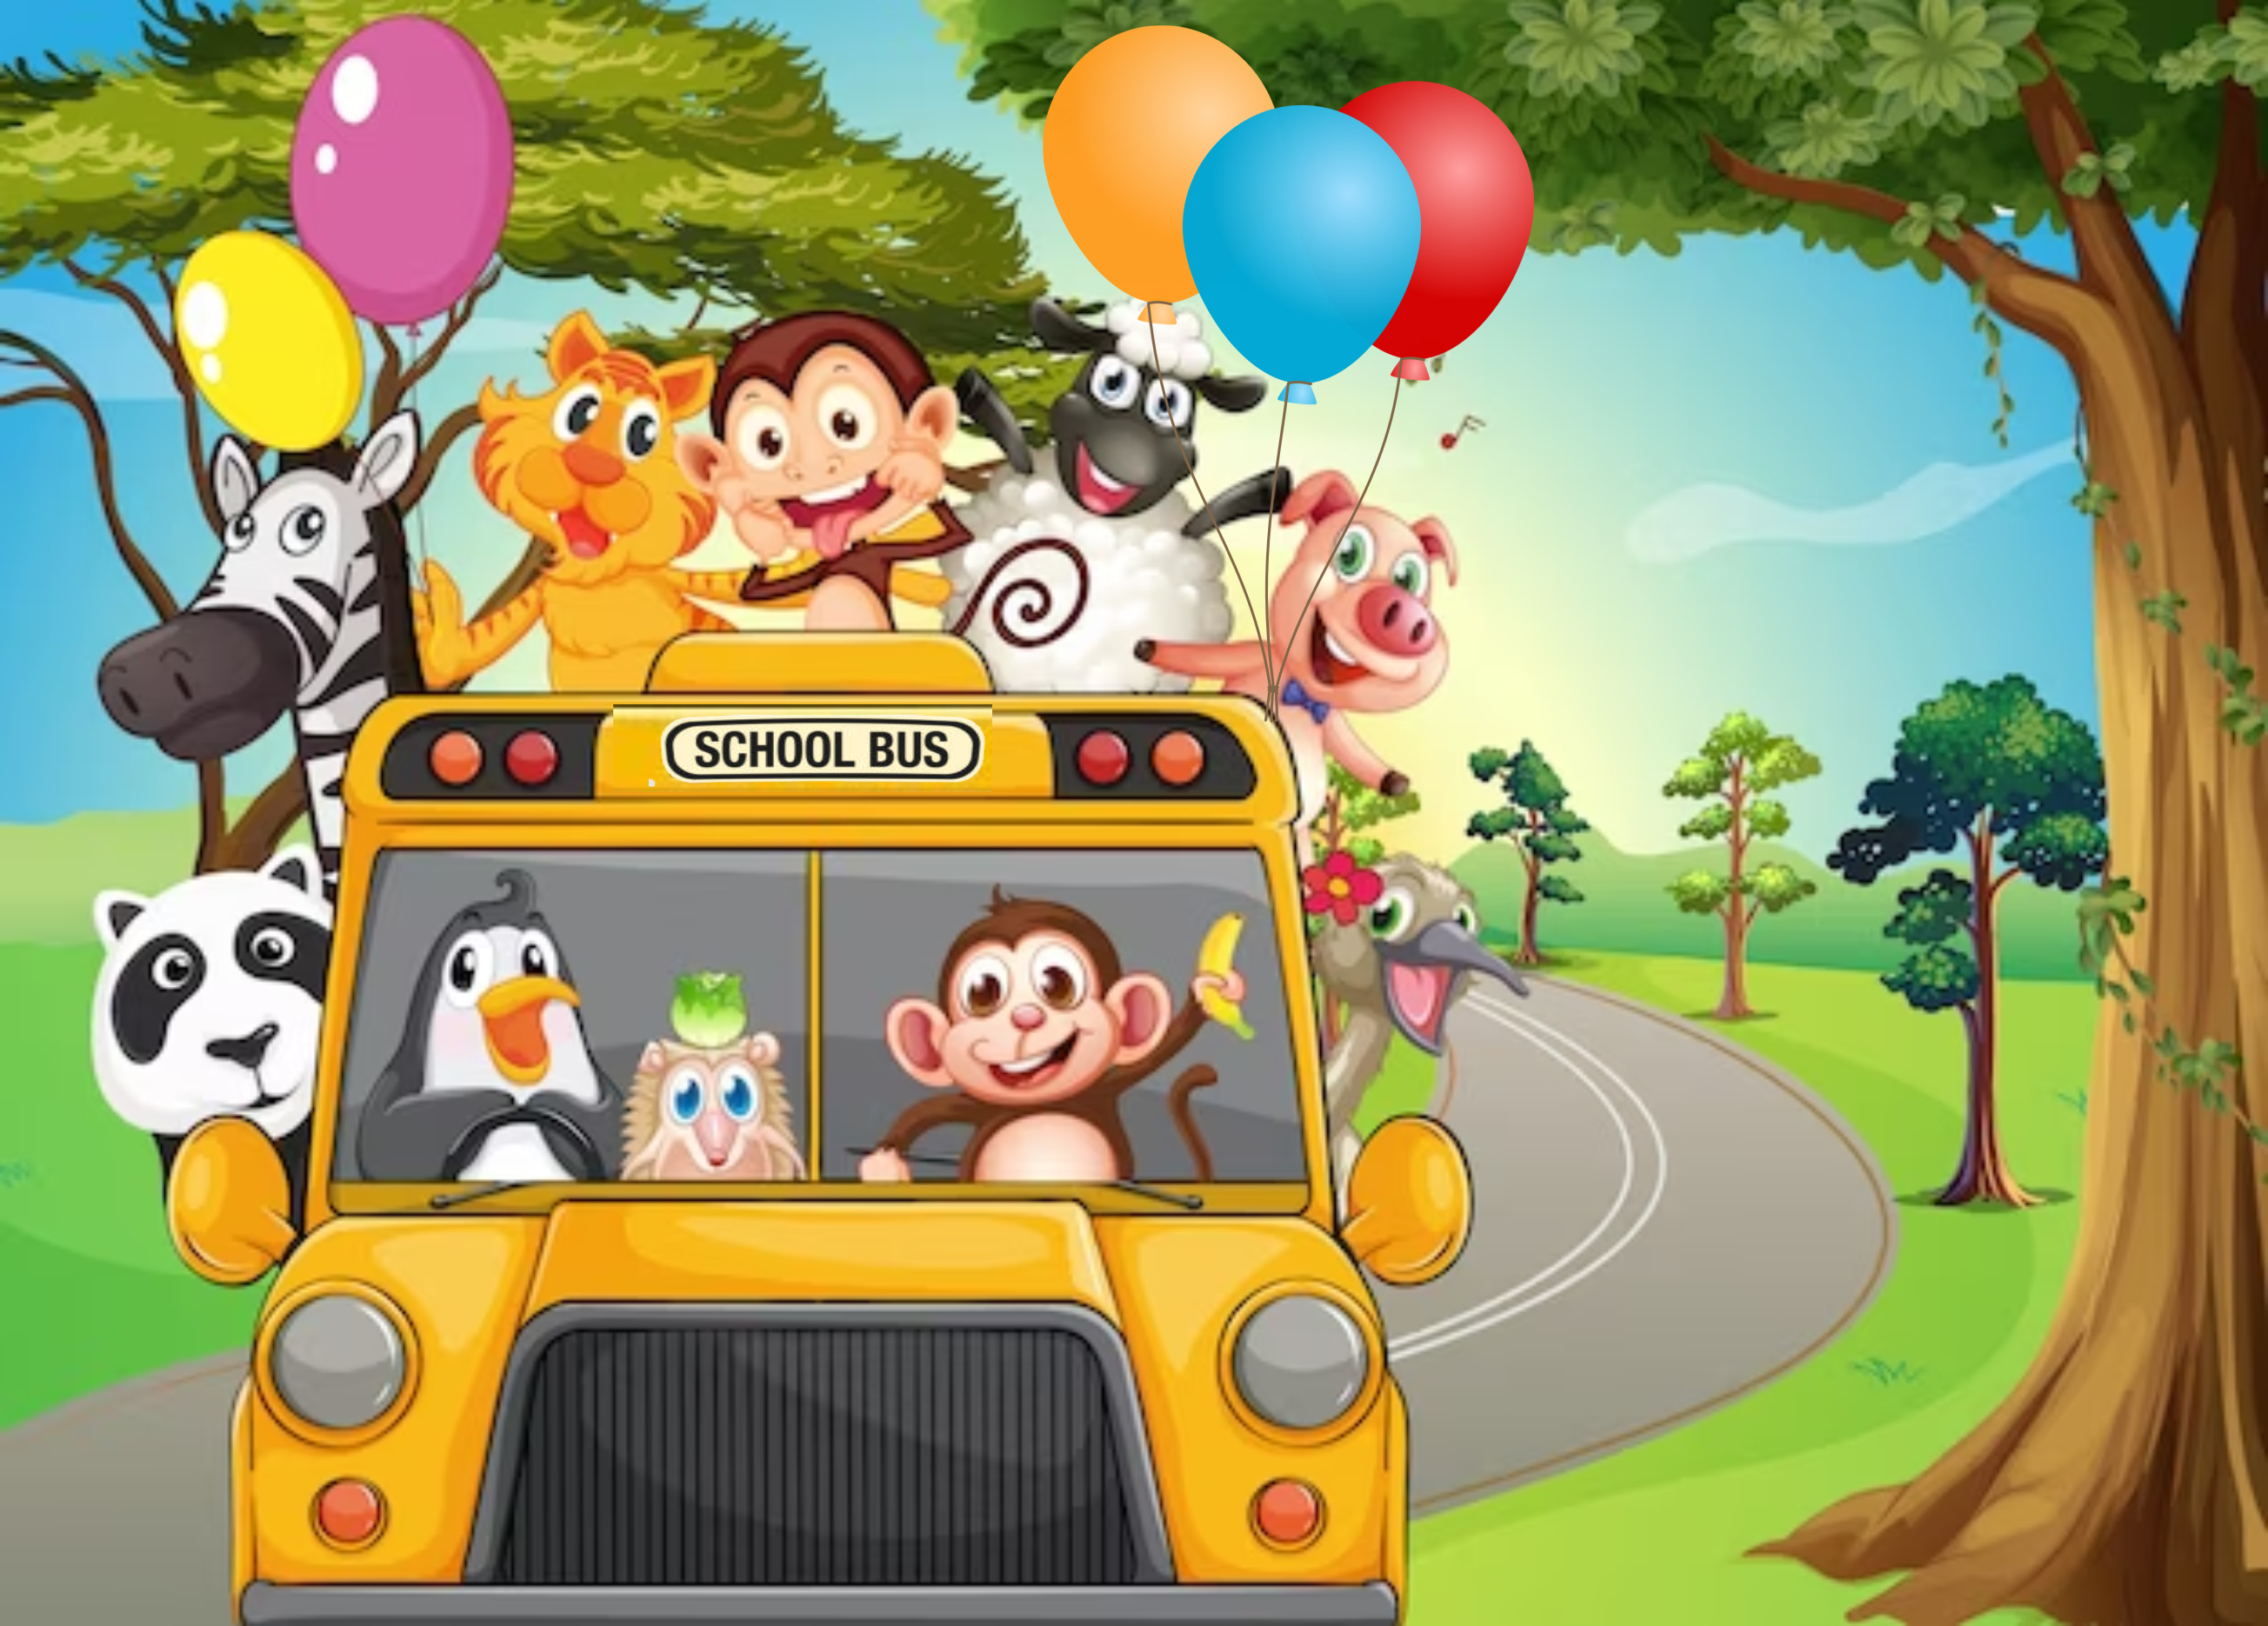 School bus with animals and balloons